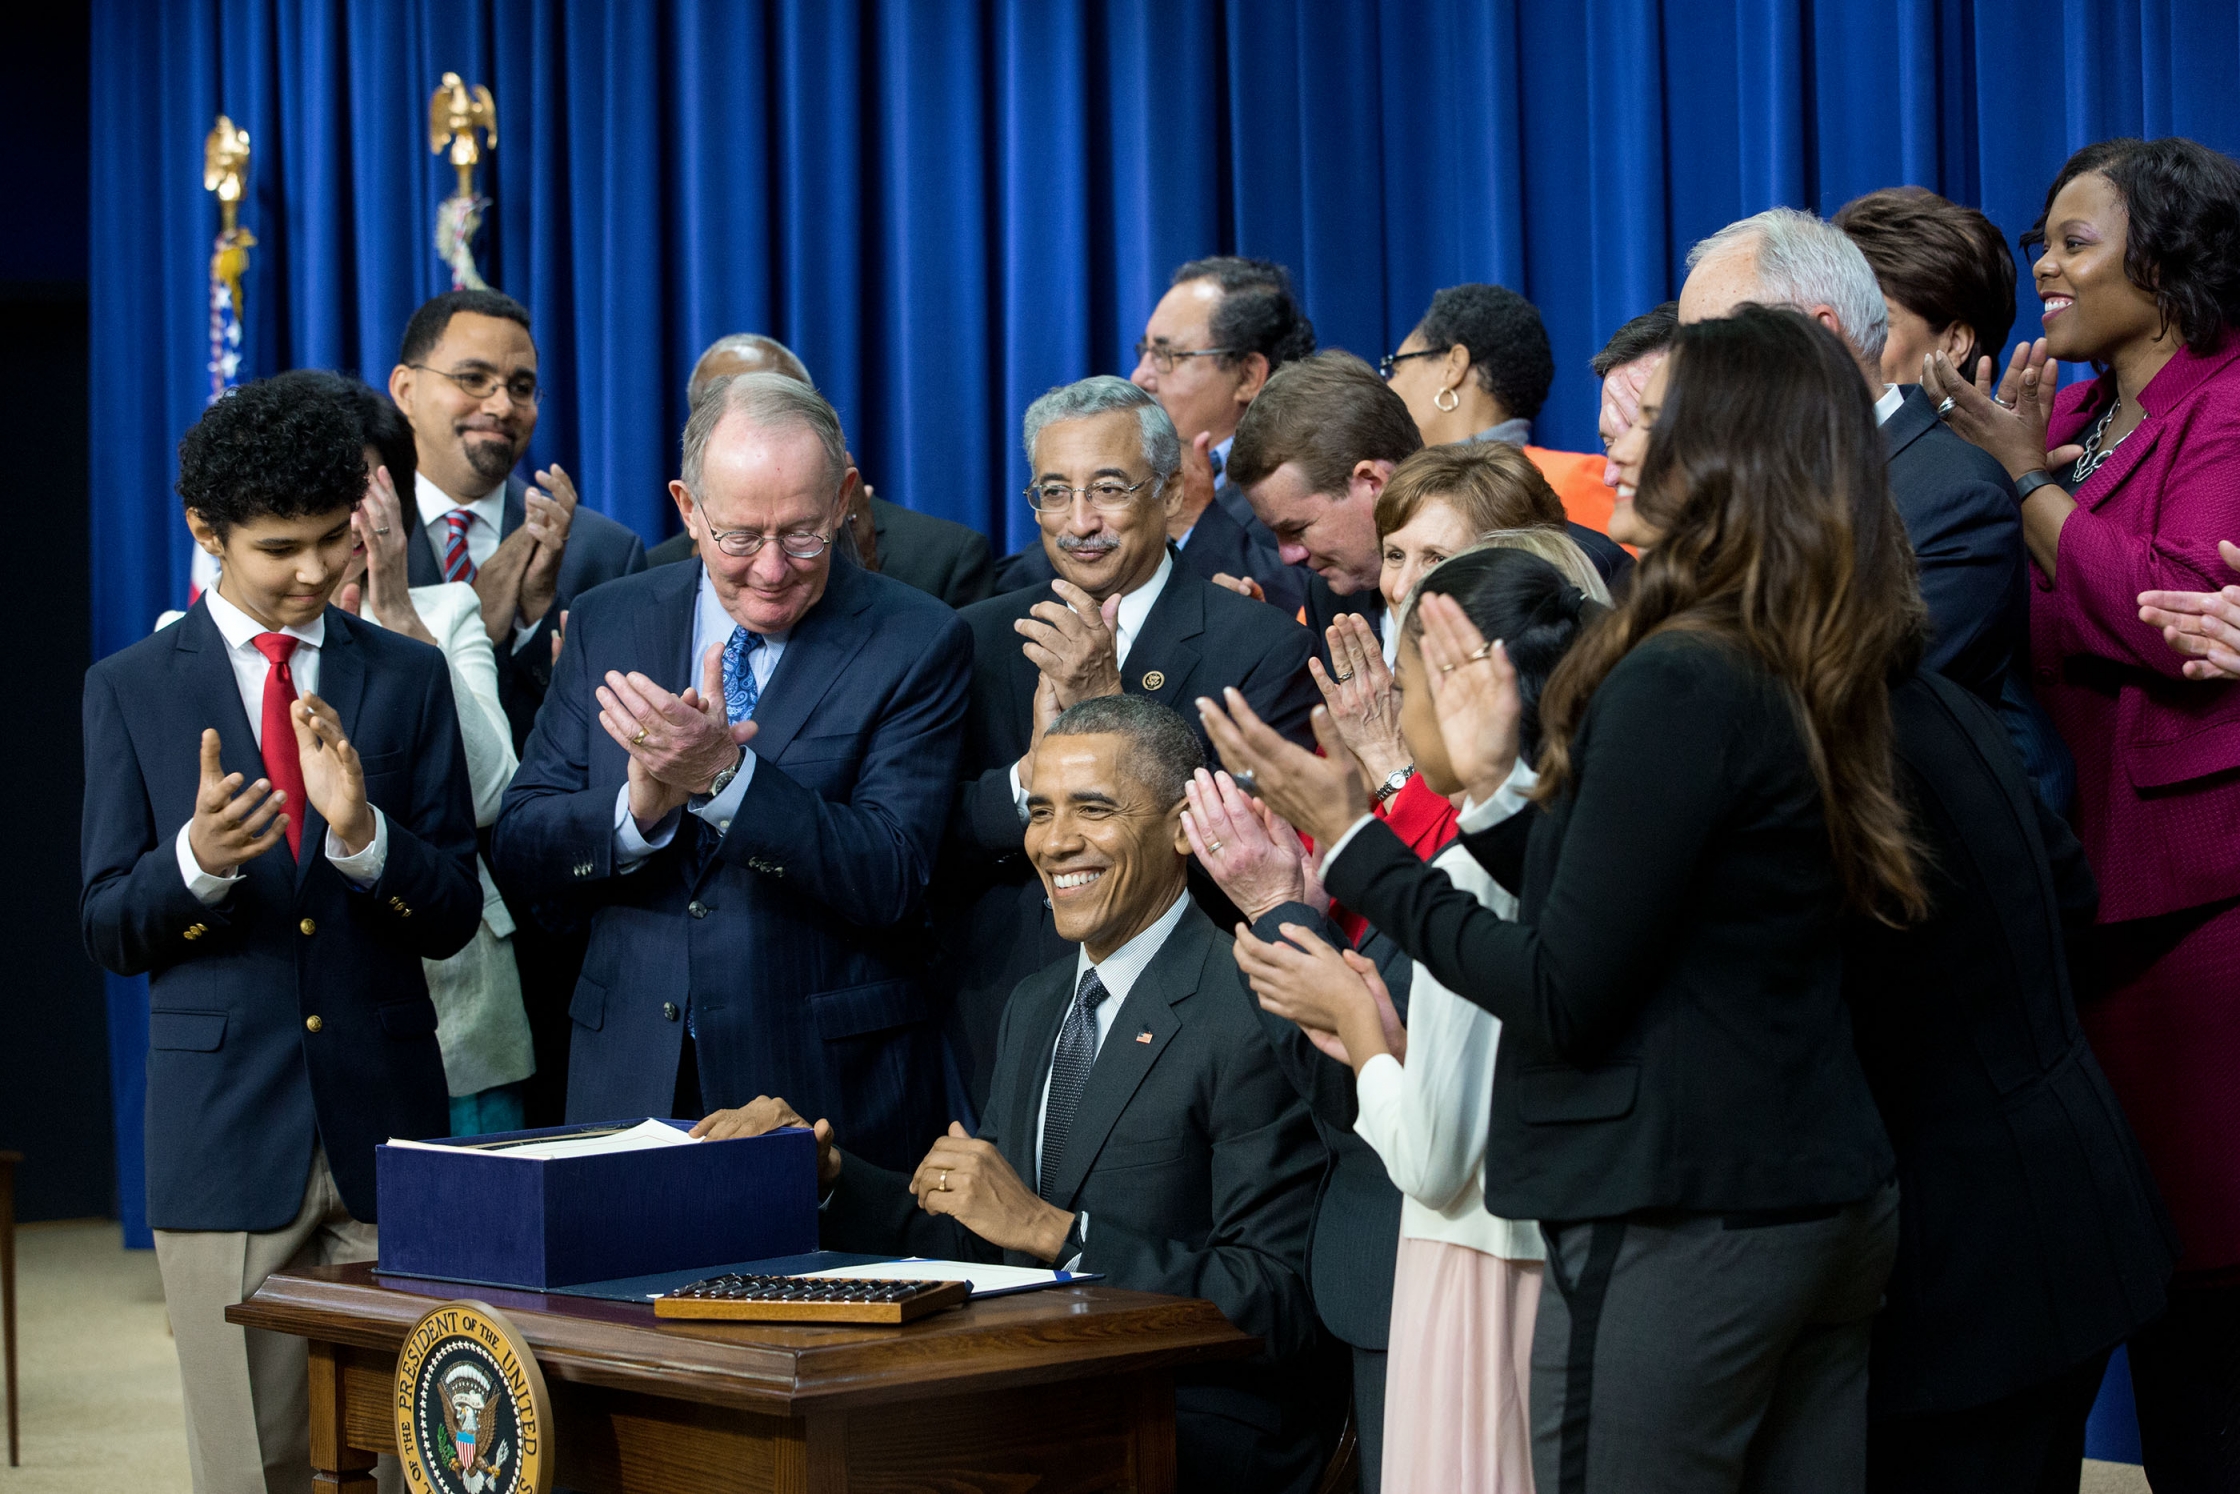 President Obama Signs the ESSA into Law